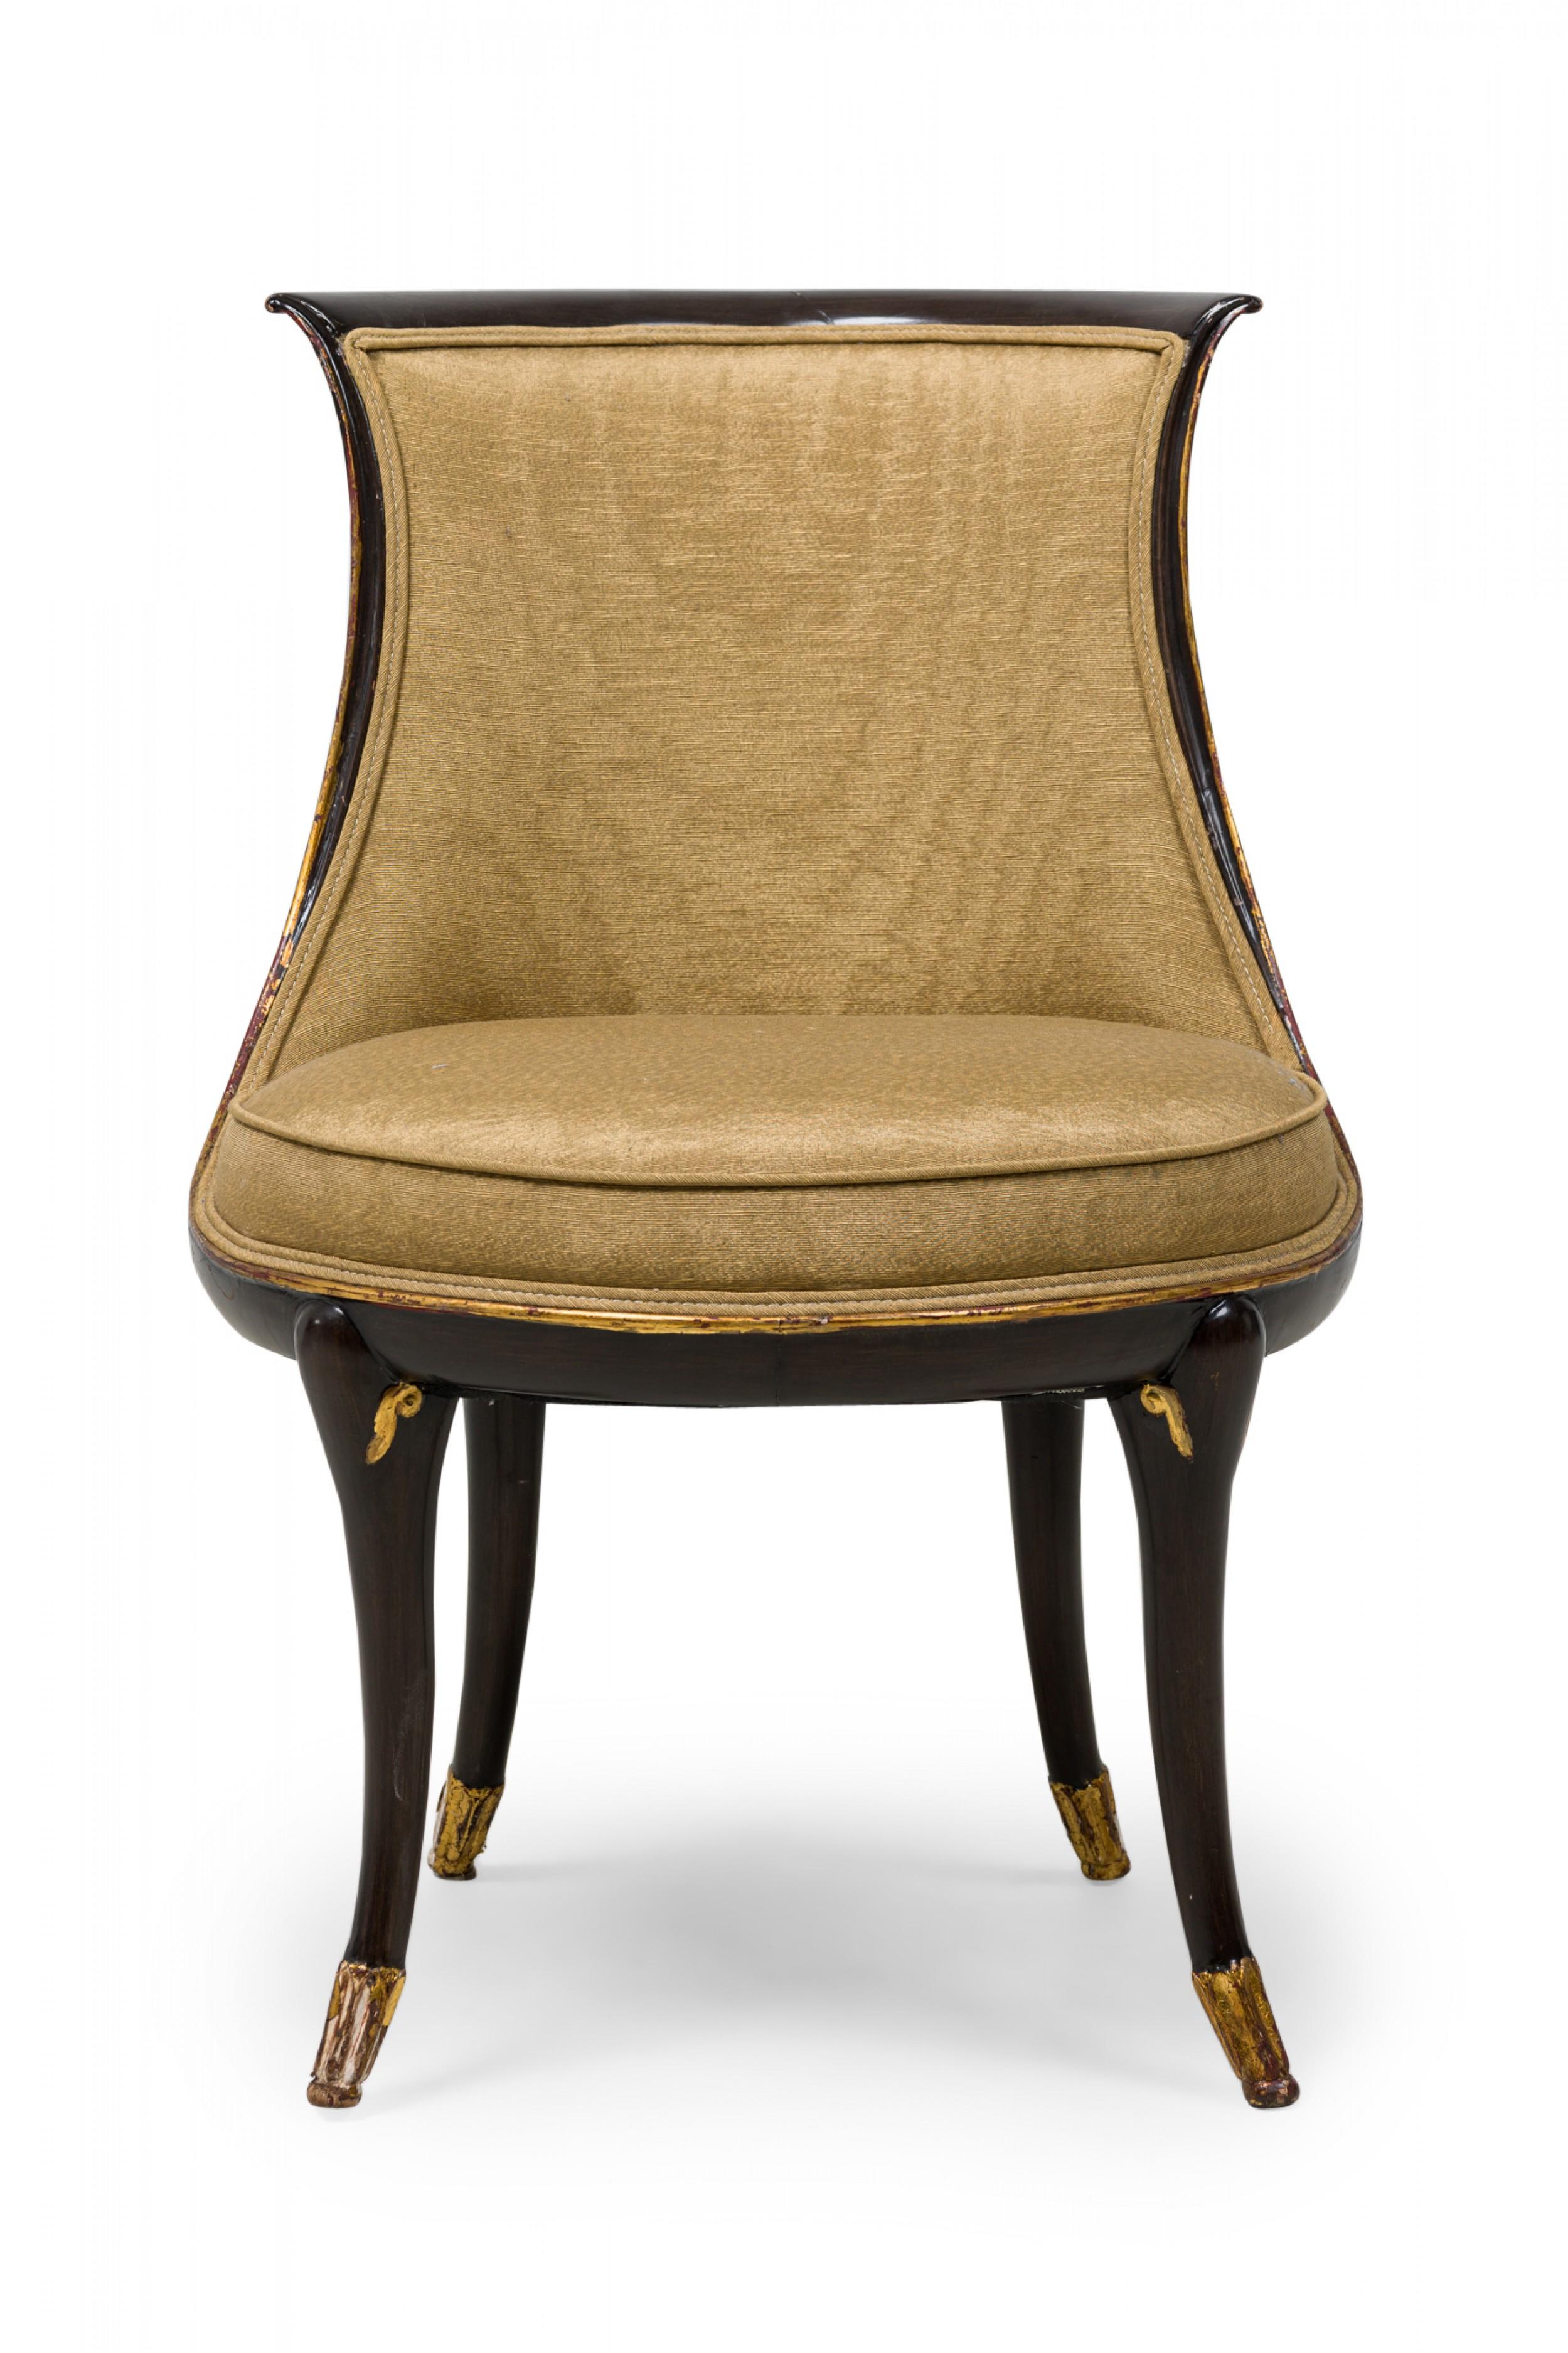 SET of 4 midcentury (1950s) American walnut painted and parcel-gilt dining chairs with concave tapered backs inlaid with a parallel brass double border, upholstered in a beige and gold fabric, the splayed legs topped by decorative gilt-highlighted,